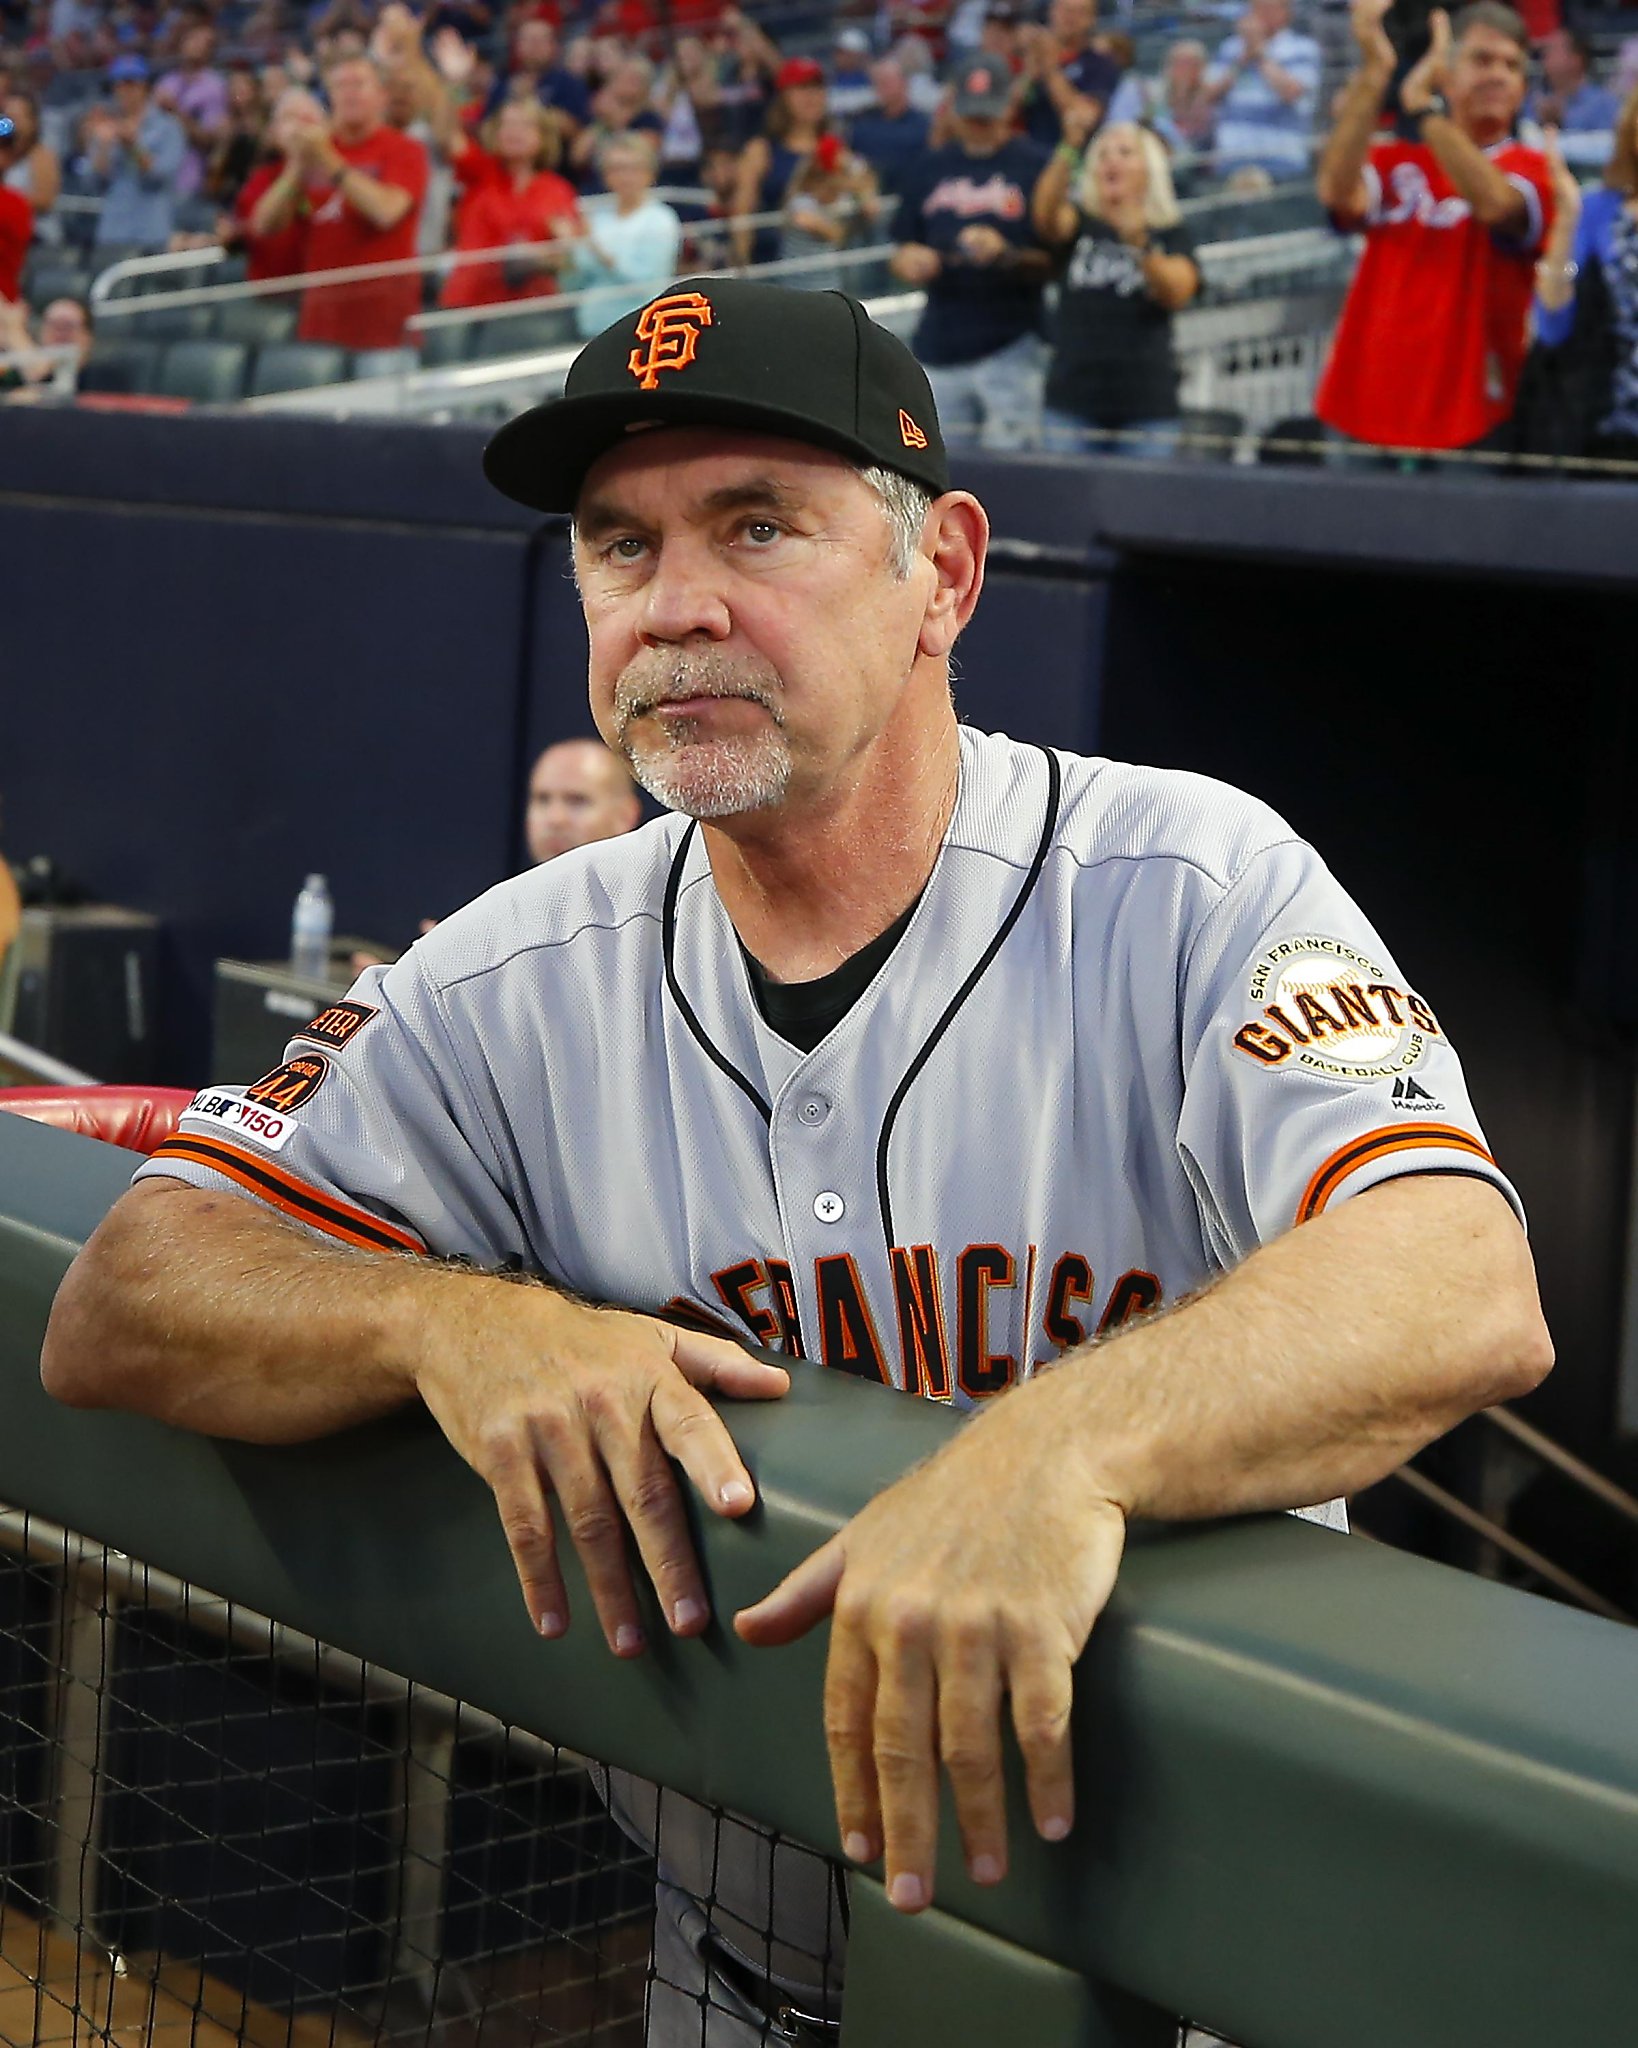 Former Padres, Giants manager Bochy to manage French team